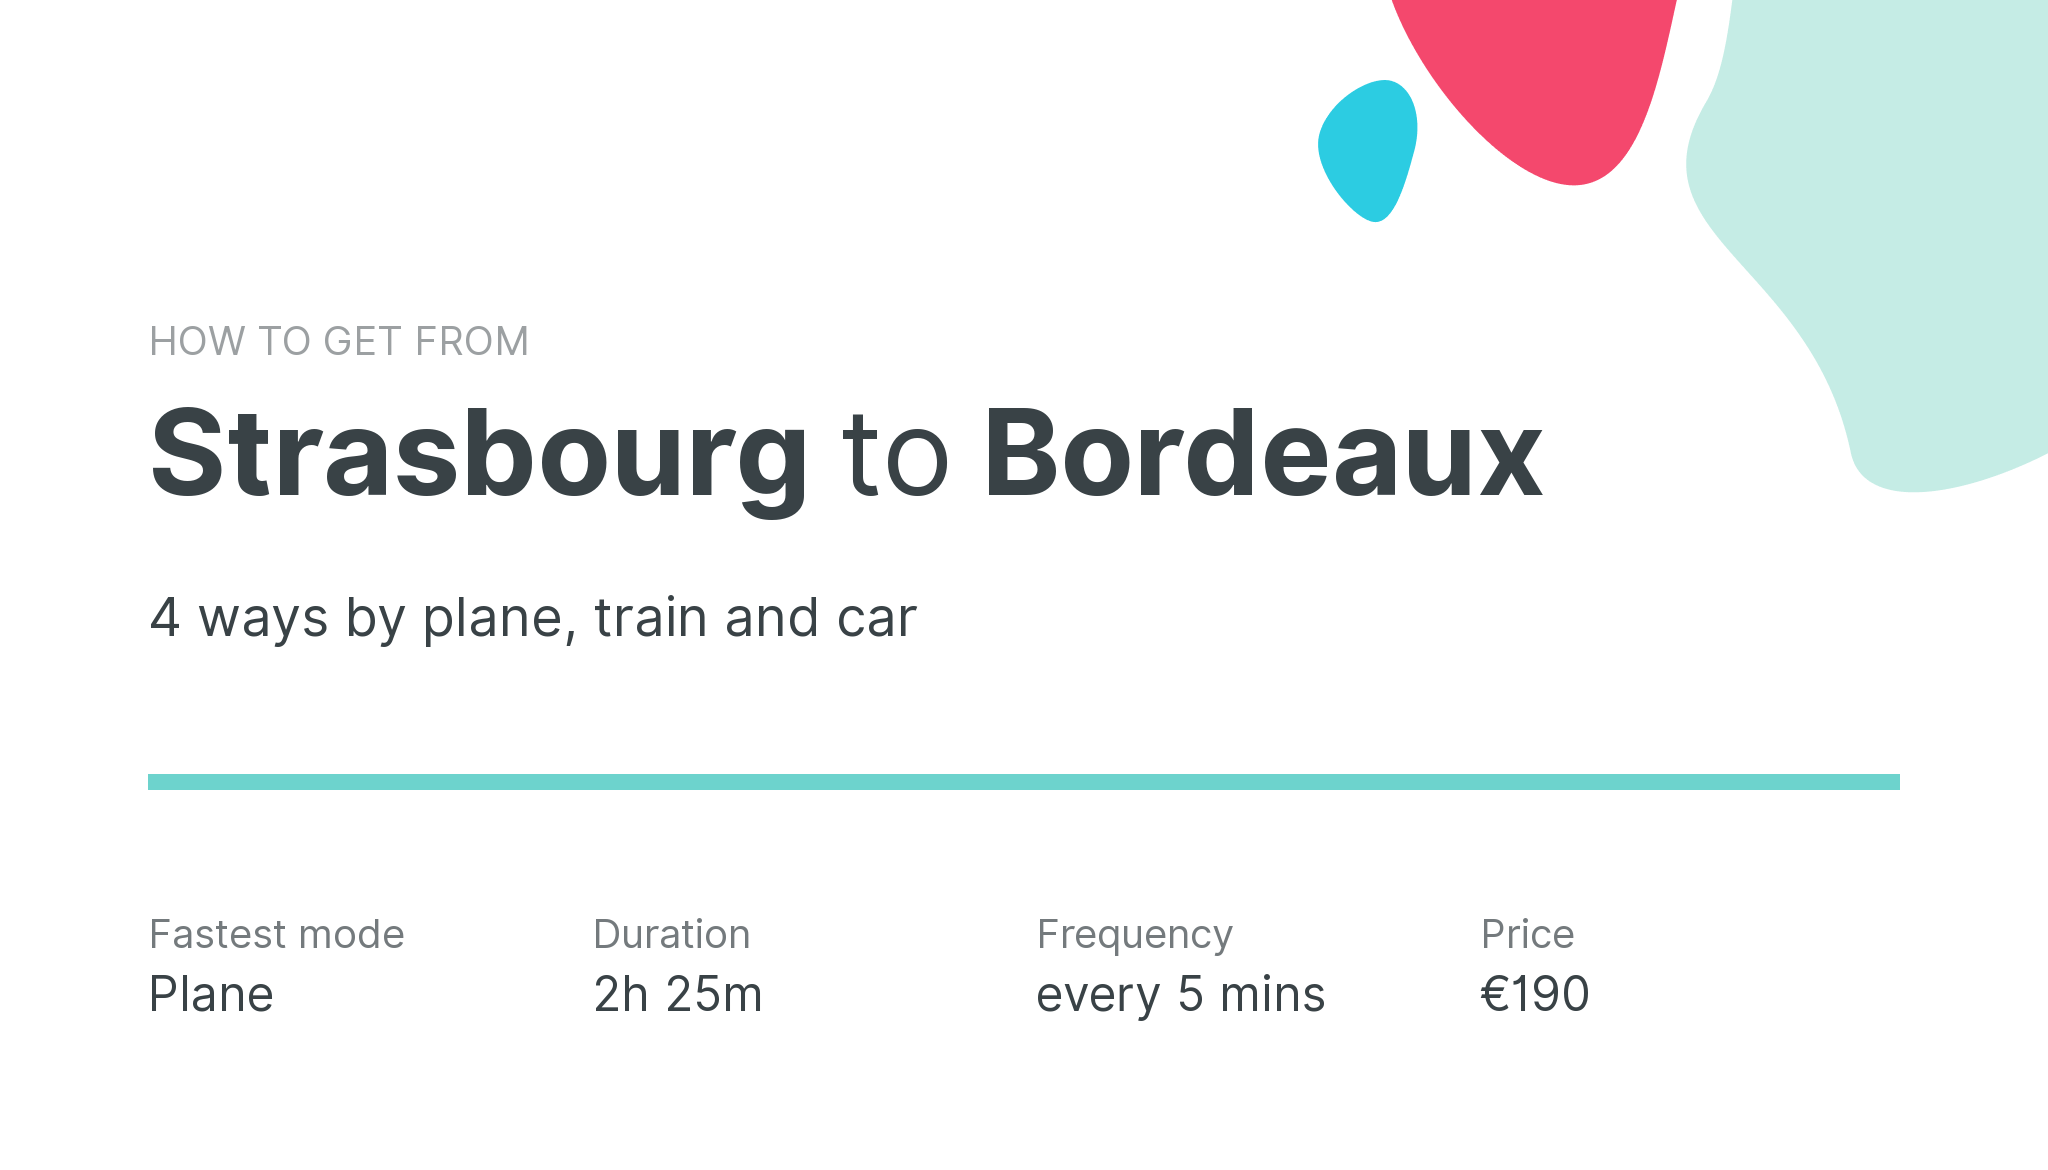 How do I get from Strasbourg to Bordeaux